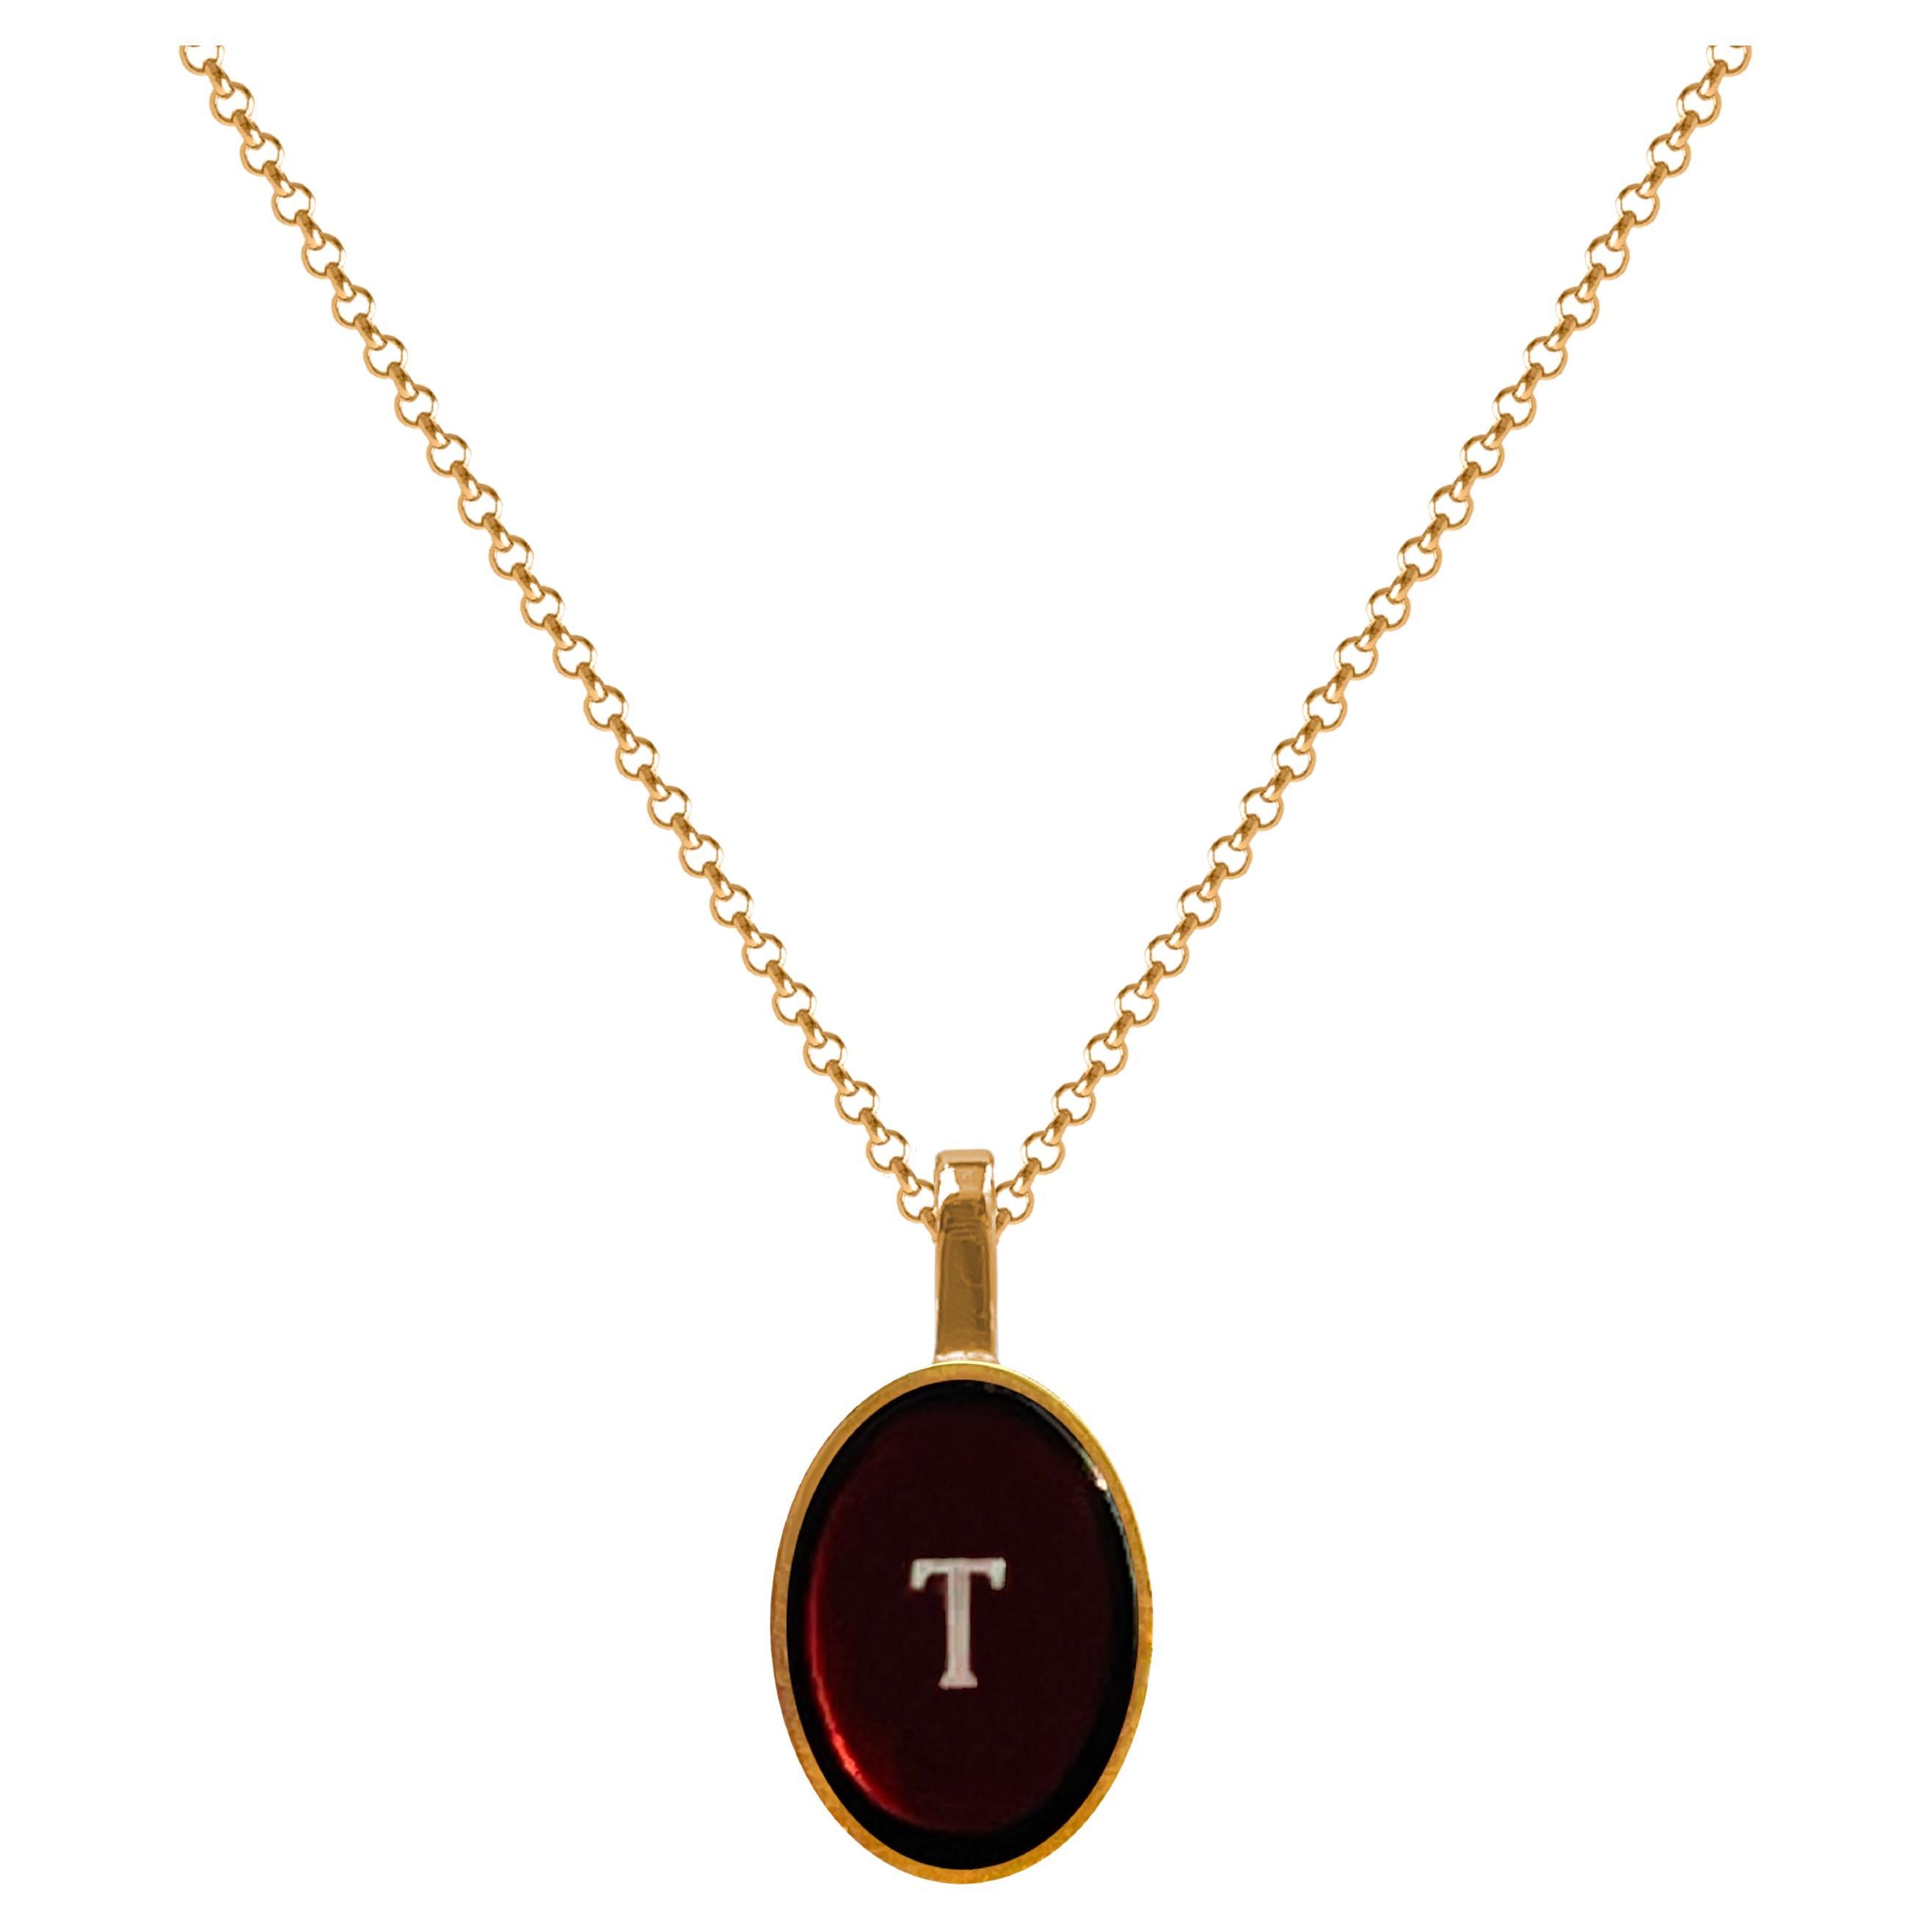 Necklace with amber pendant and name letter gold - T For Sale